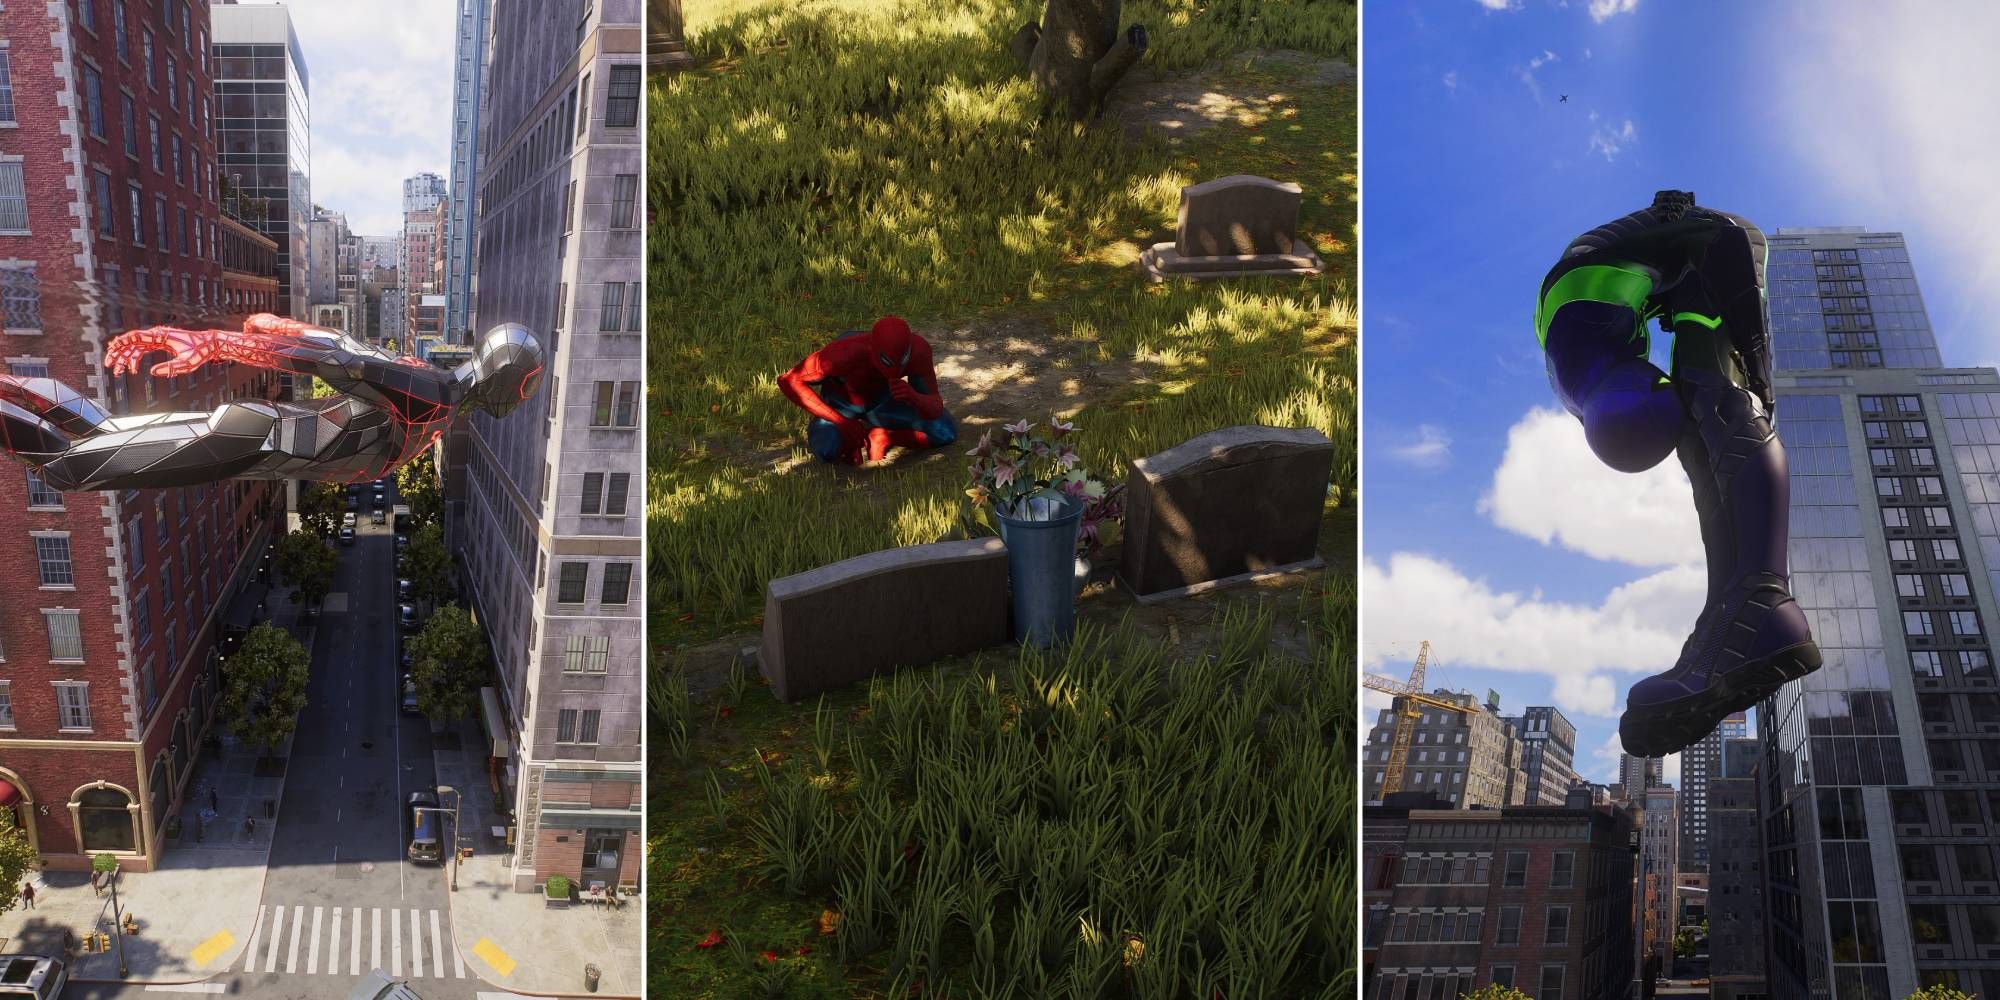 Miles flies with his web wings, Peter visits Aunt May's grave, and Miles does an aerial trick in Spider-Man 2.